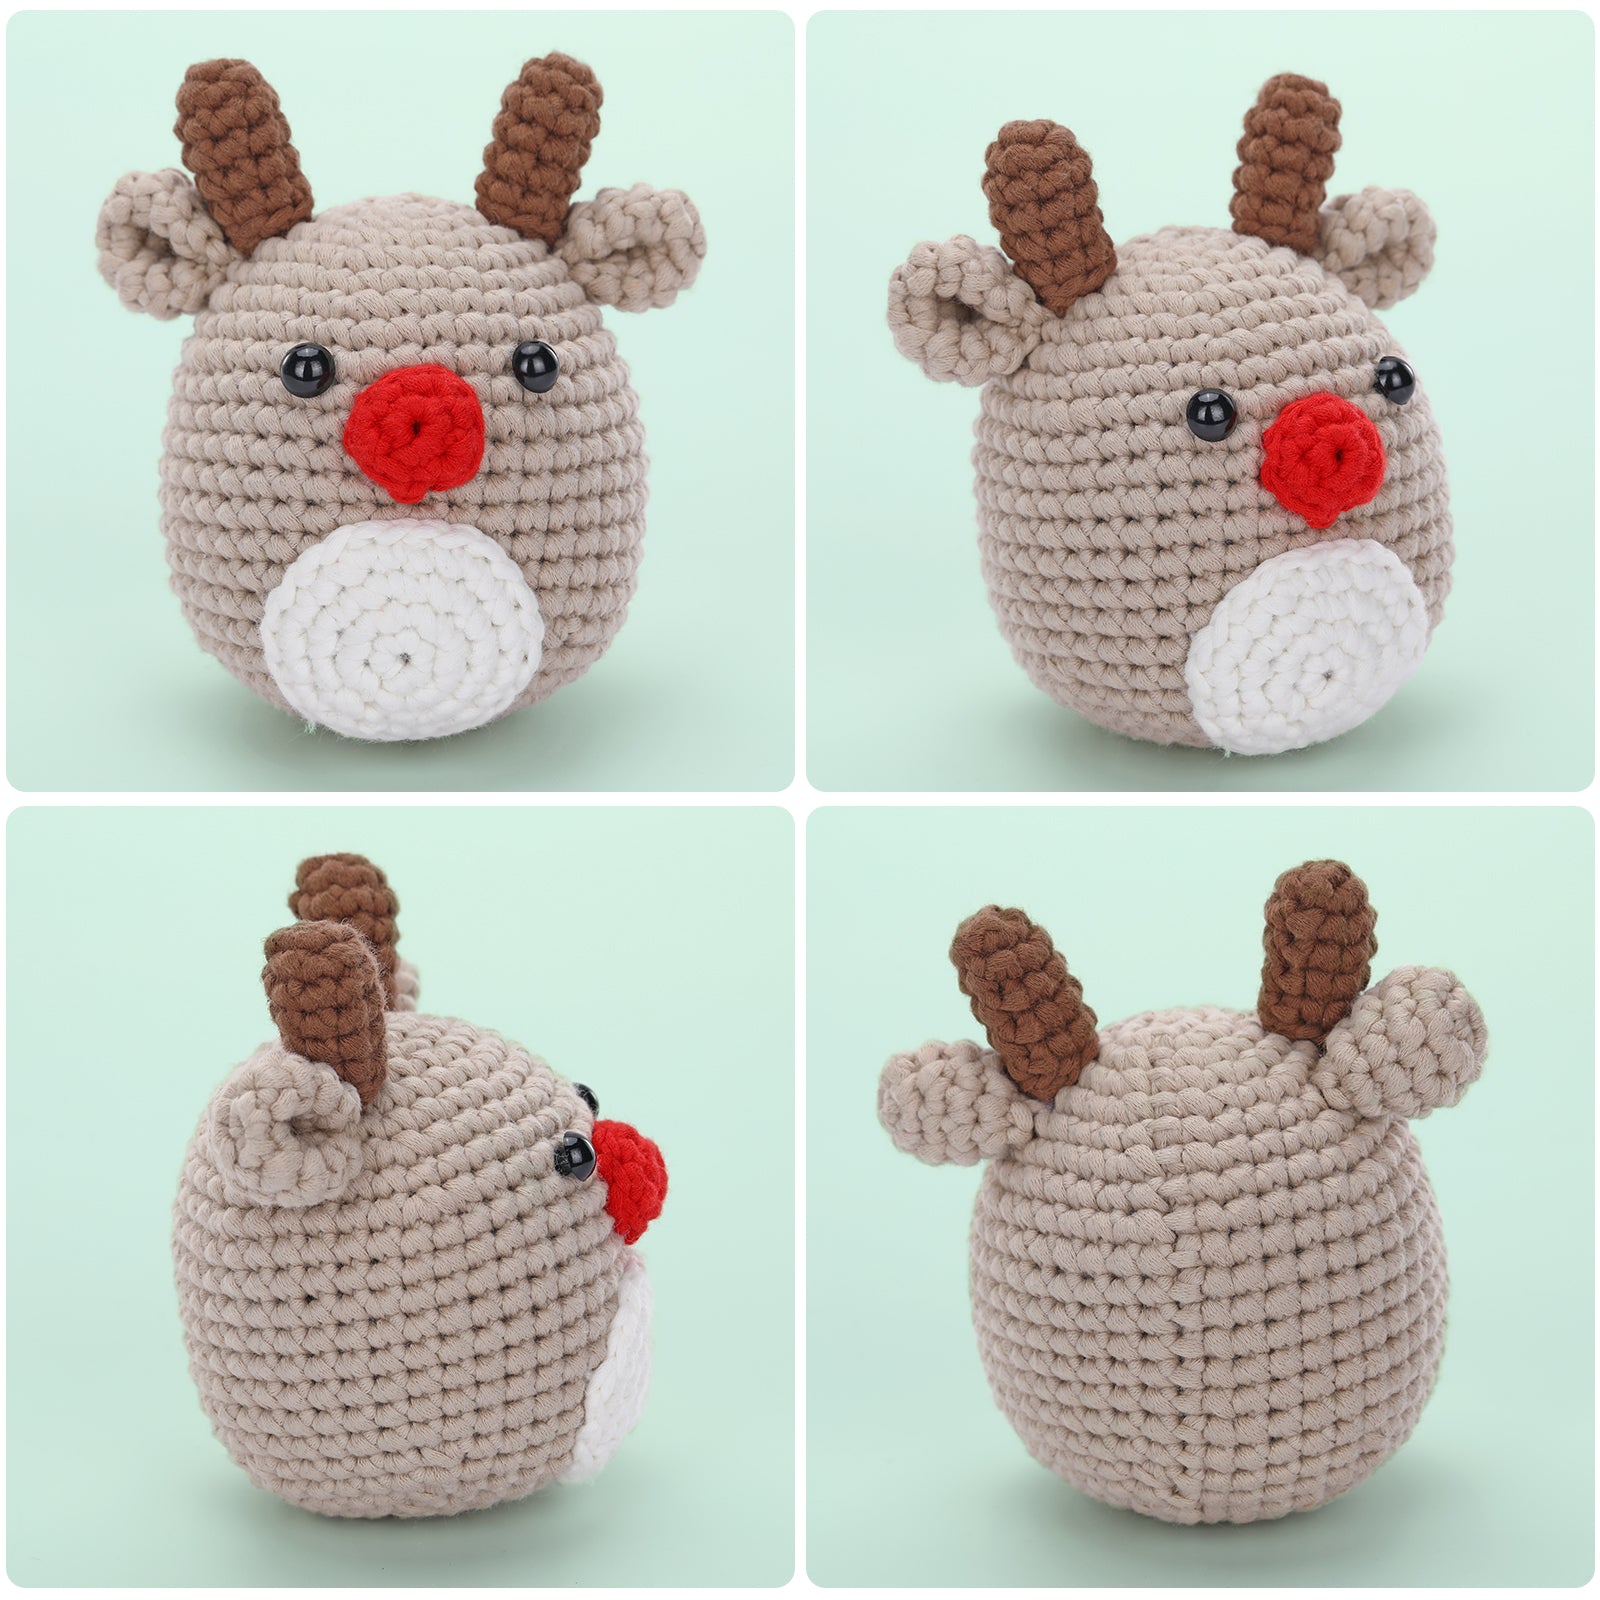 CrochetBox Crochet Kit for Beginners: Starter Crochet Kit for Adults, Teens, Include Easy to Use Yarn, Step-by-Step Video, Patterns, Red Nose Reindeer Style, Birthday, Holiday, Christmas Gift.